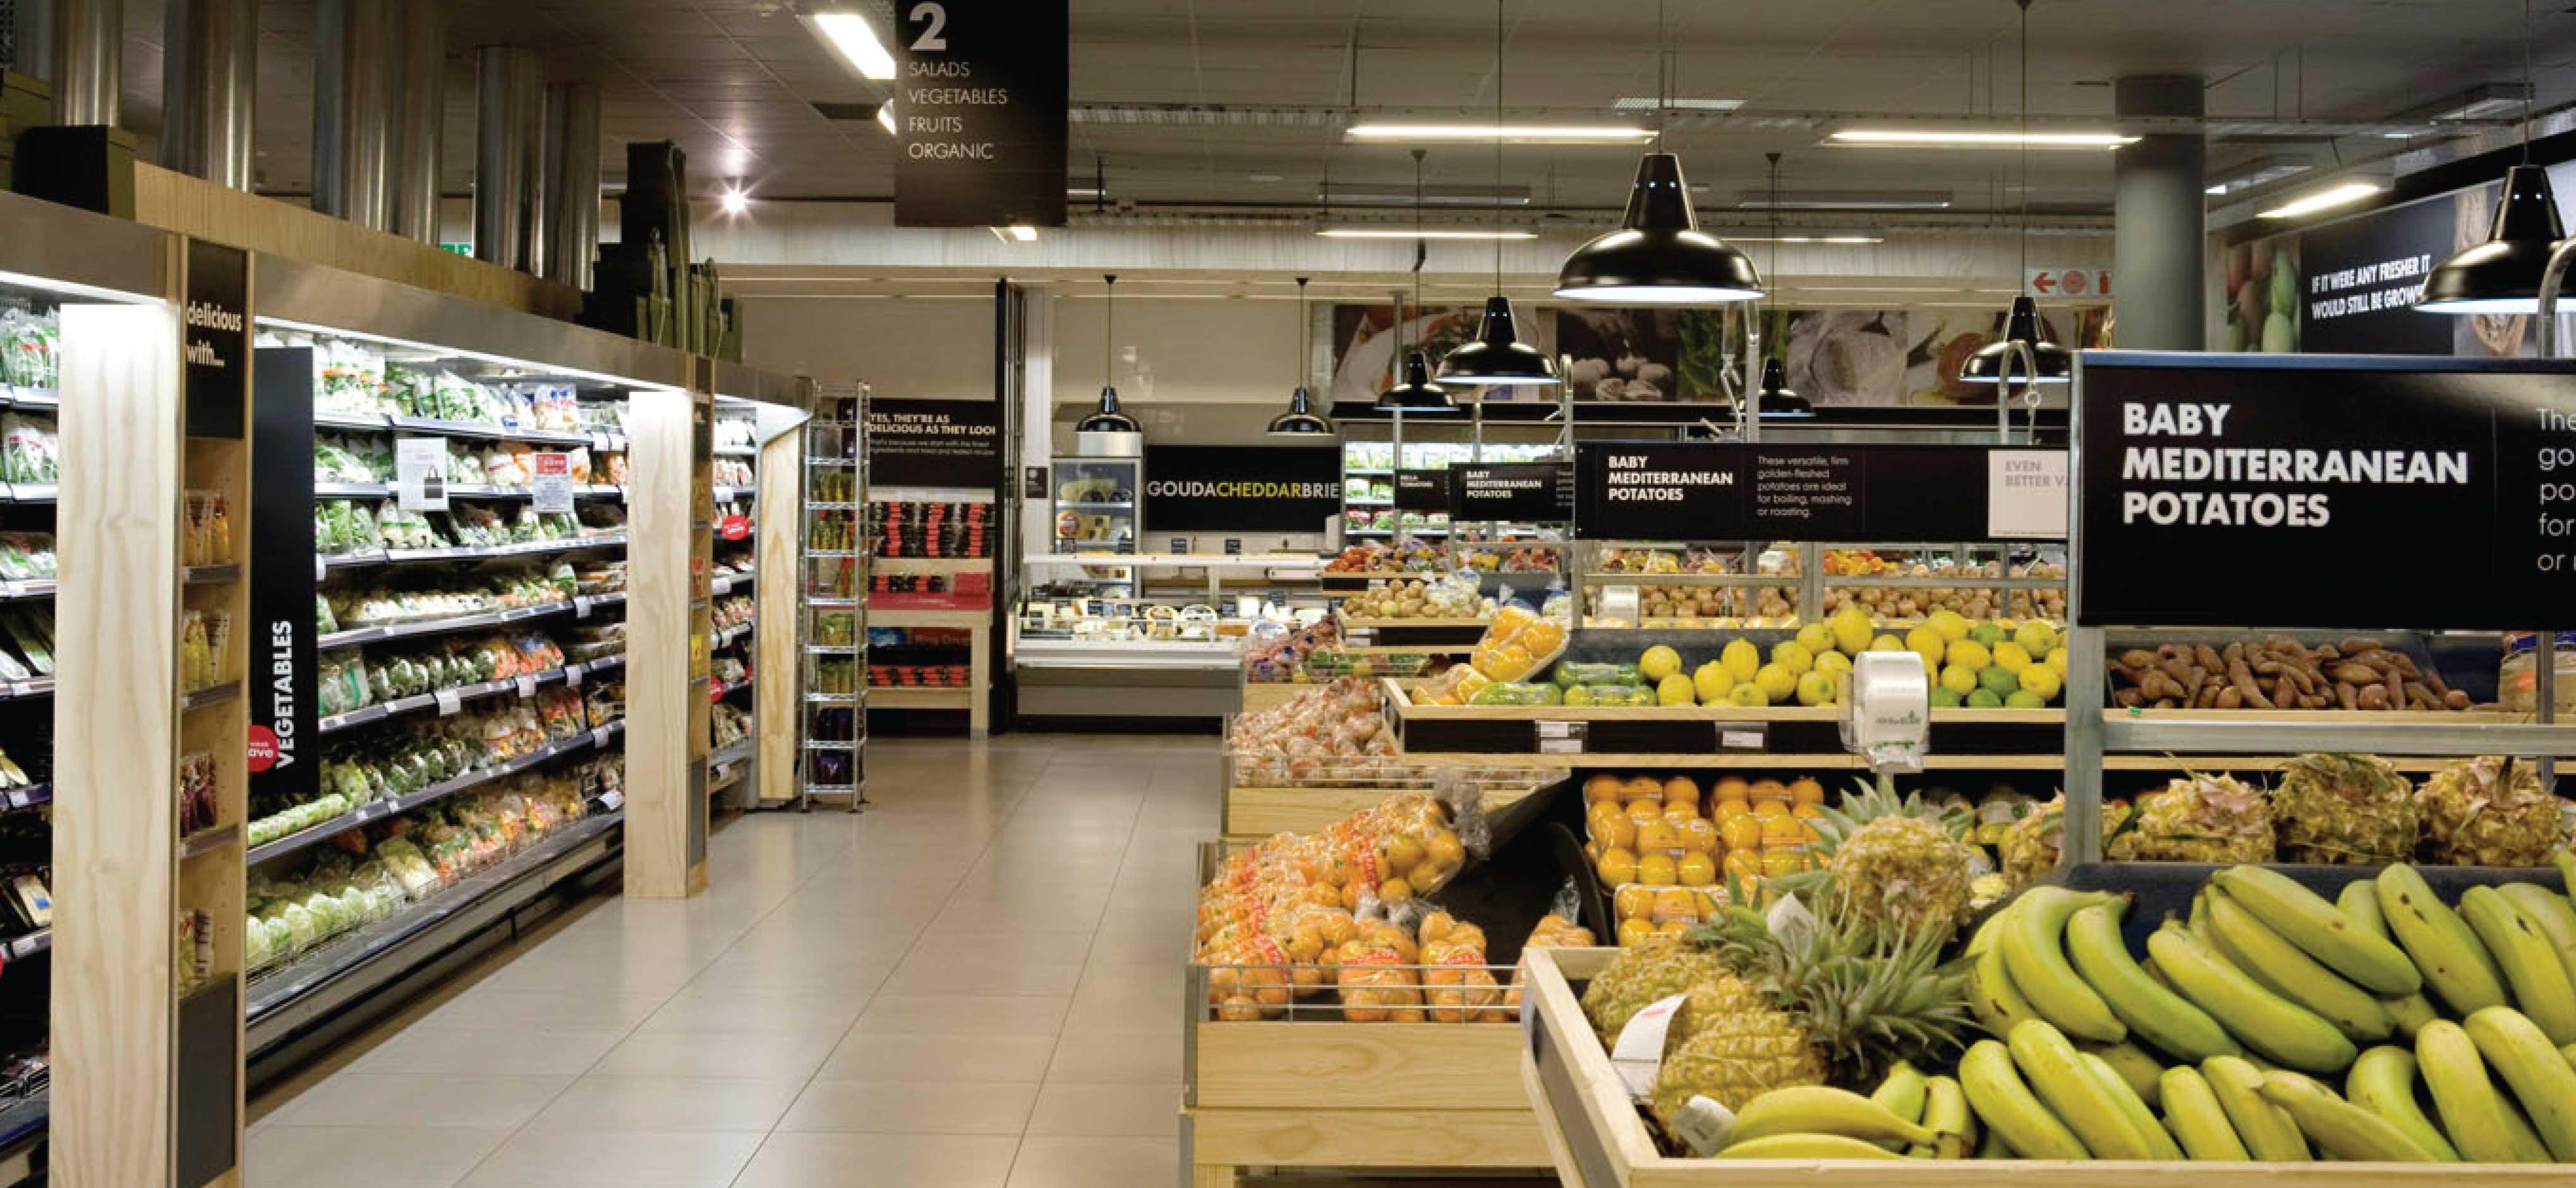 Consumer behaviour is changing and supermarket design